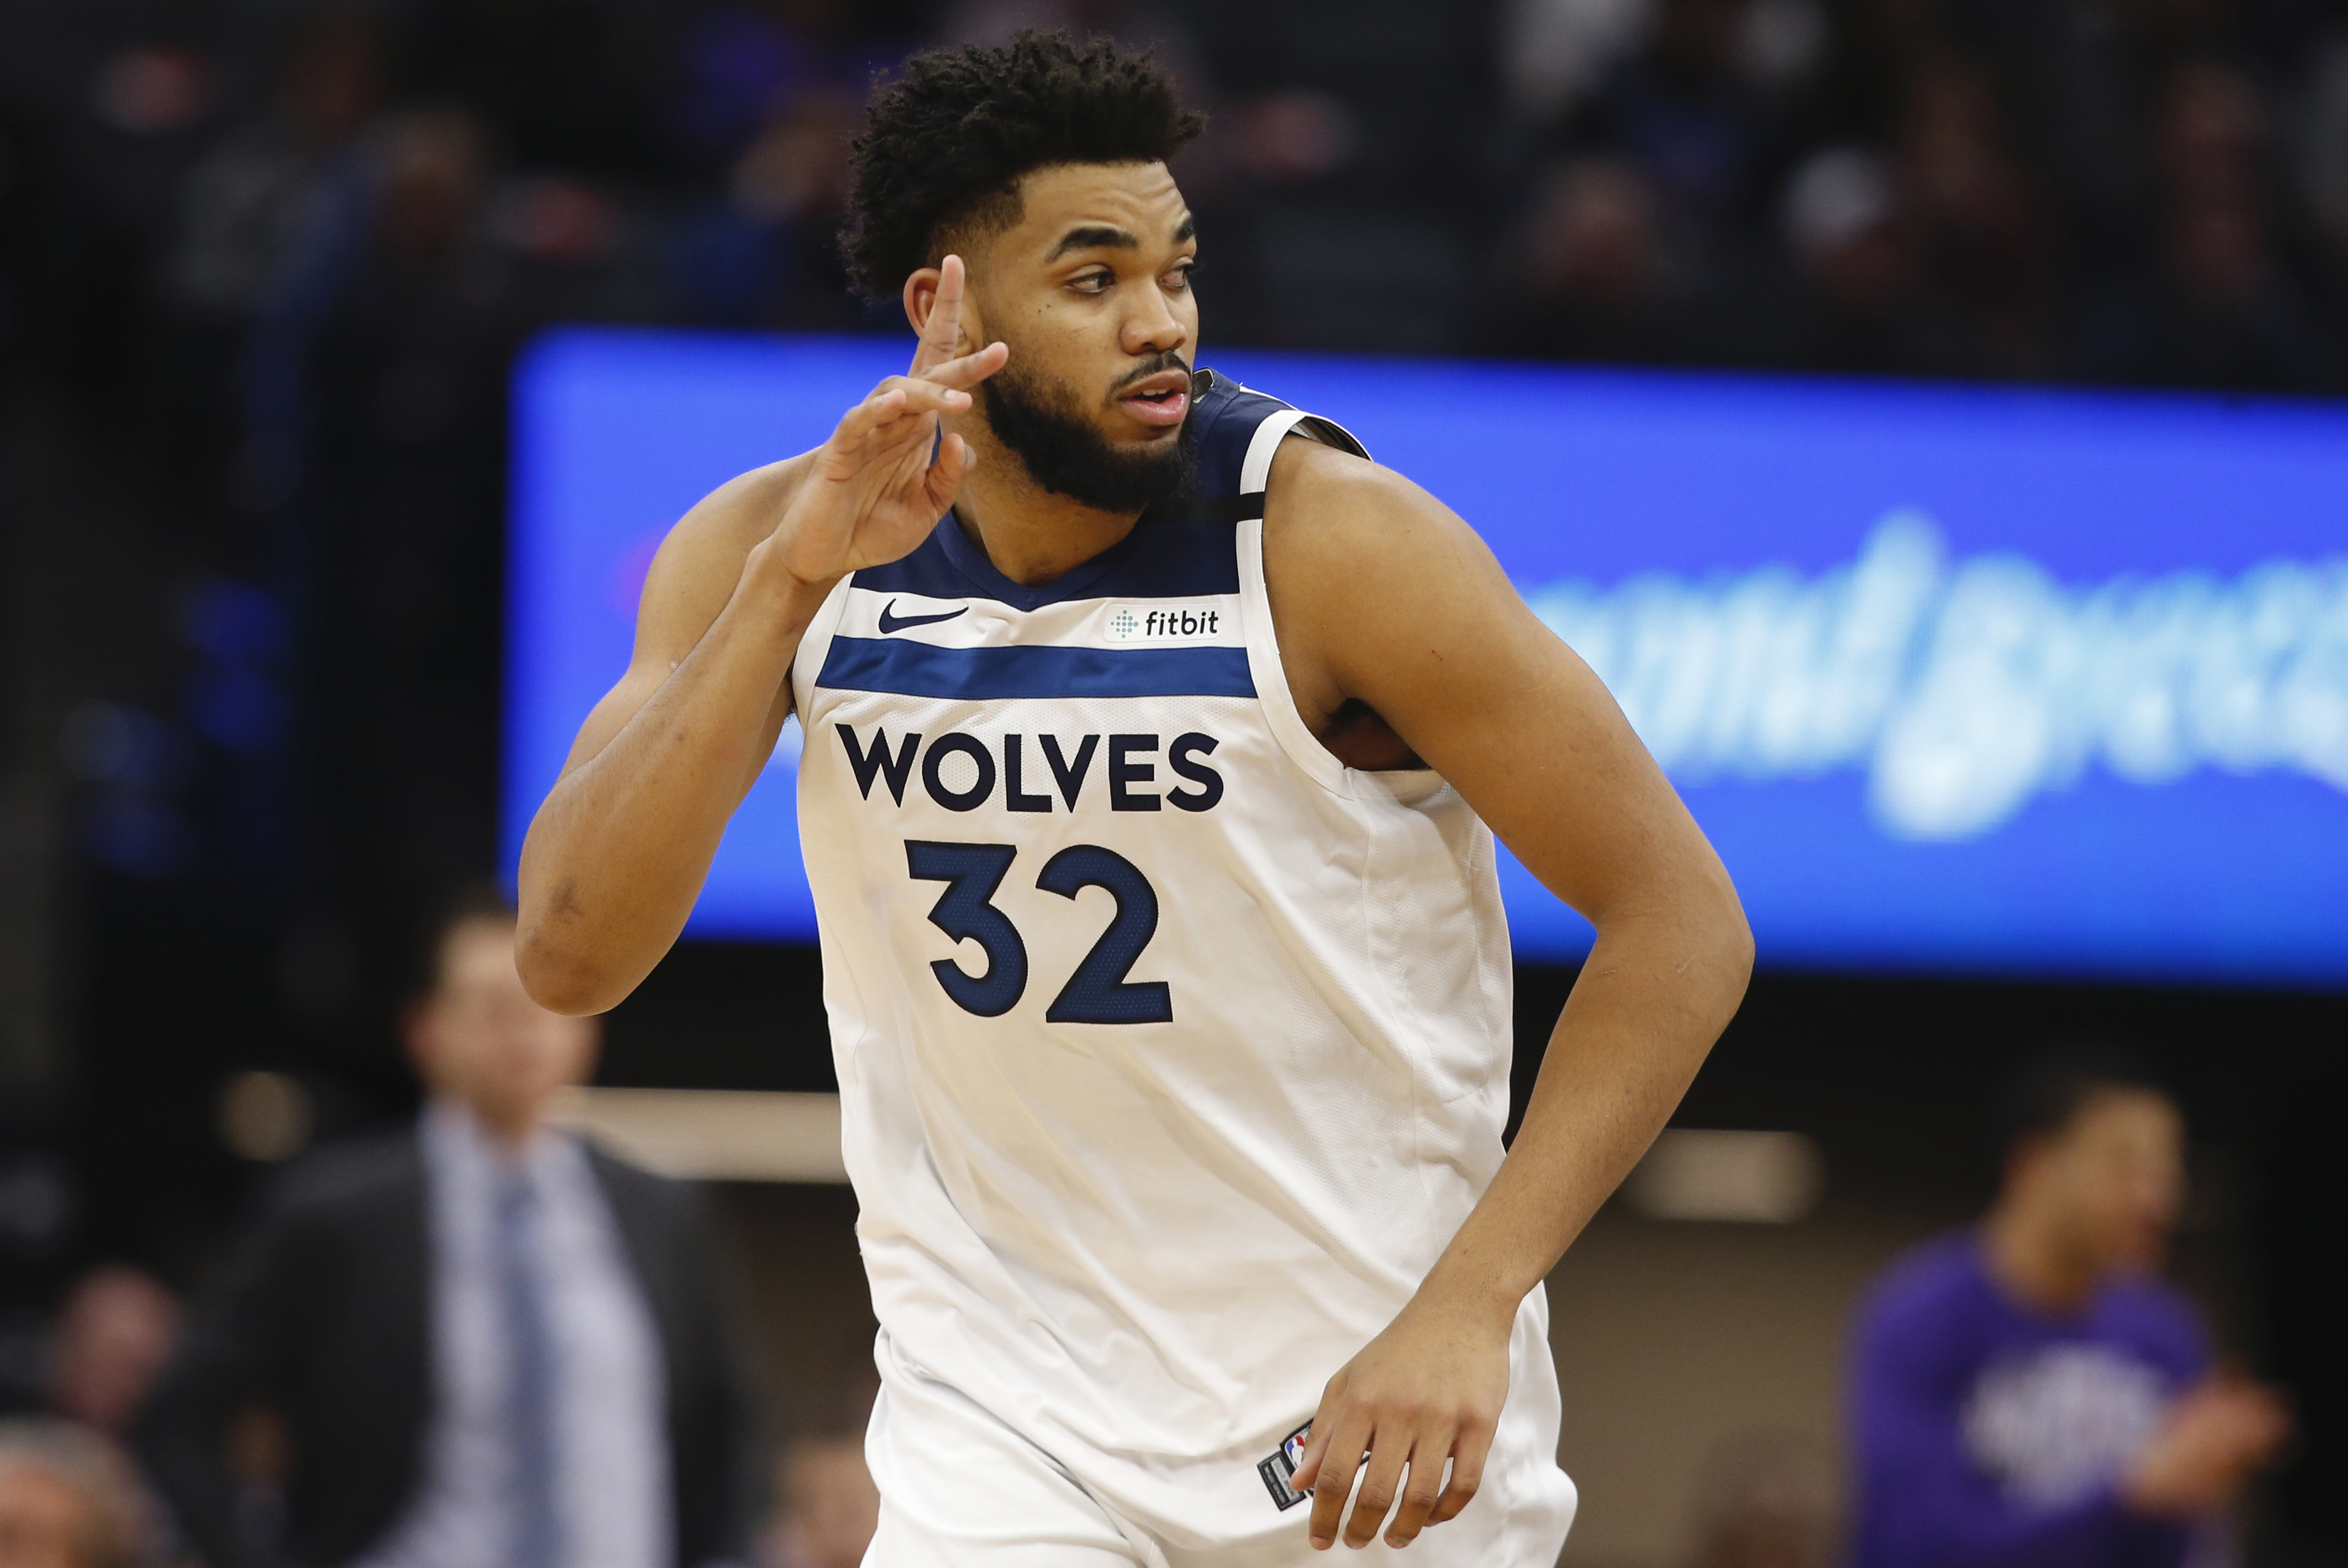 Minnesota Timberwolves center Karl-Anthony Towns was born in Edison